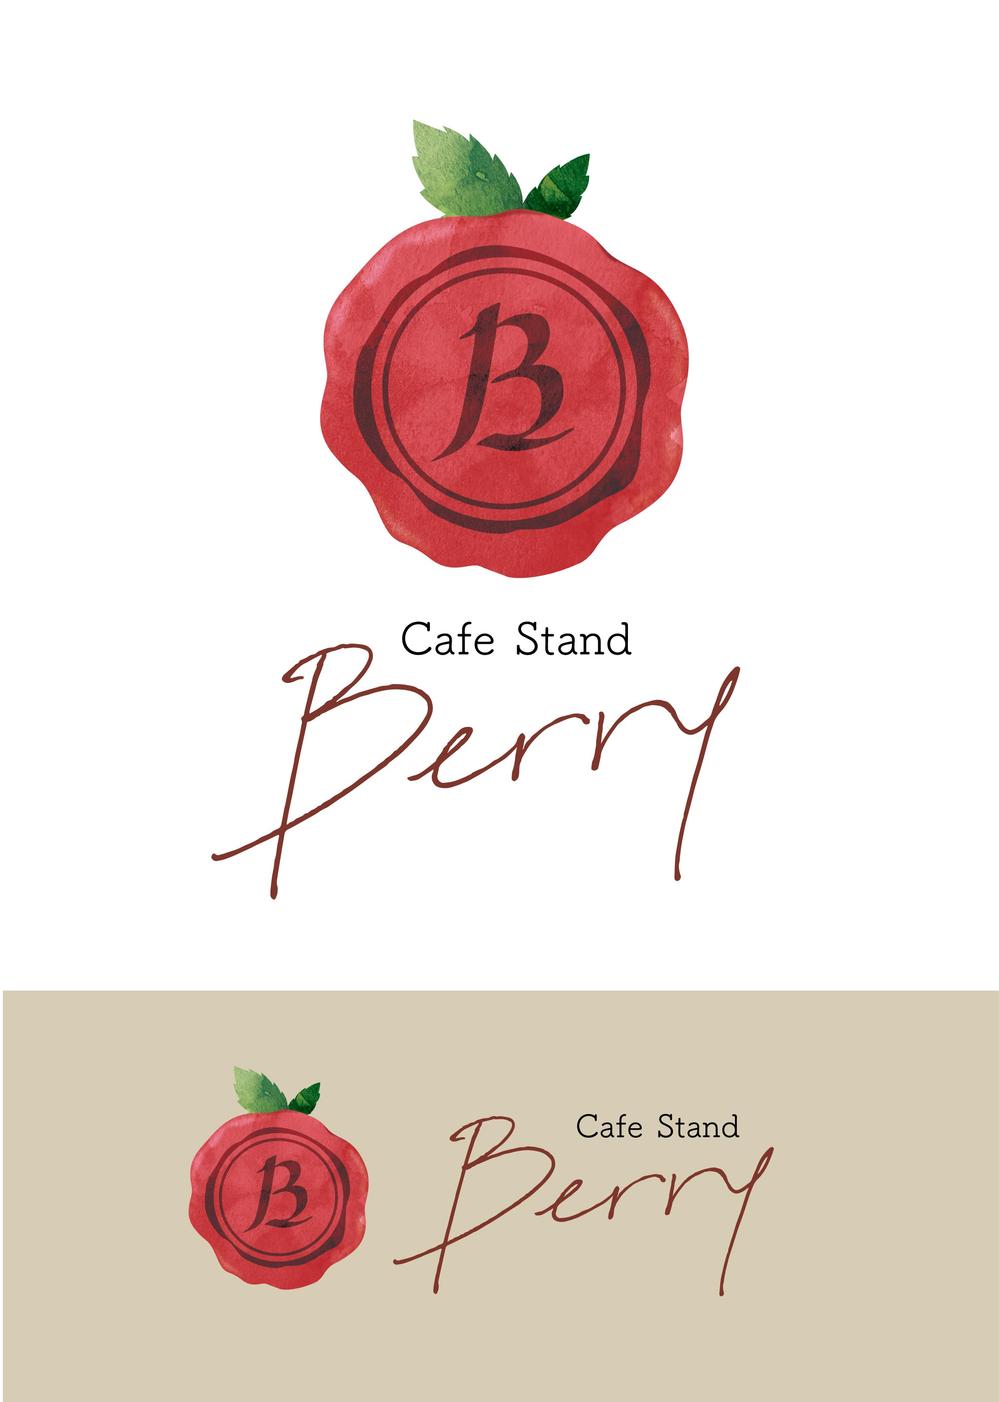 cafestandberry_2.png